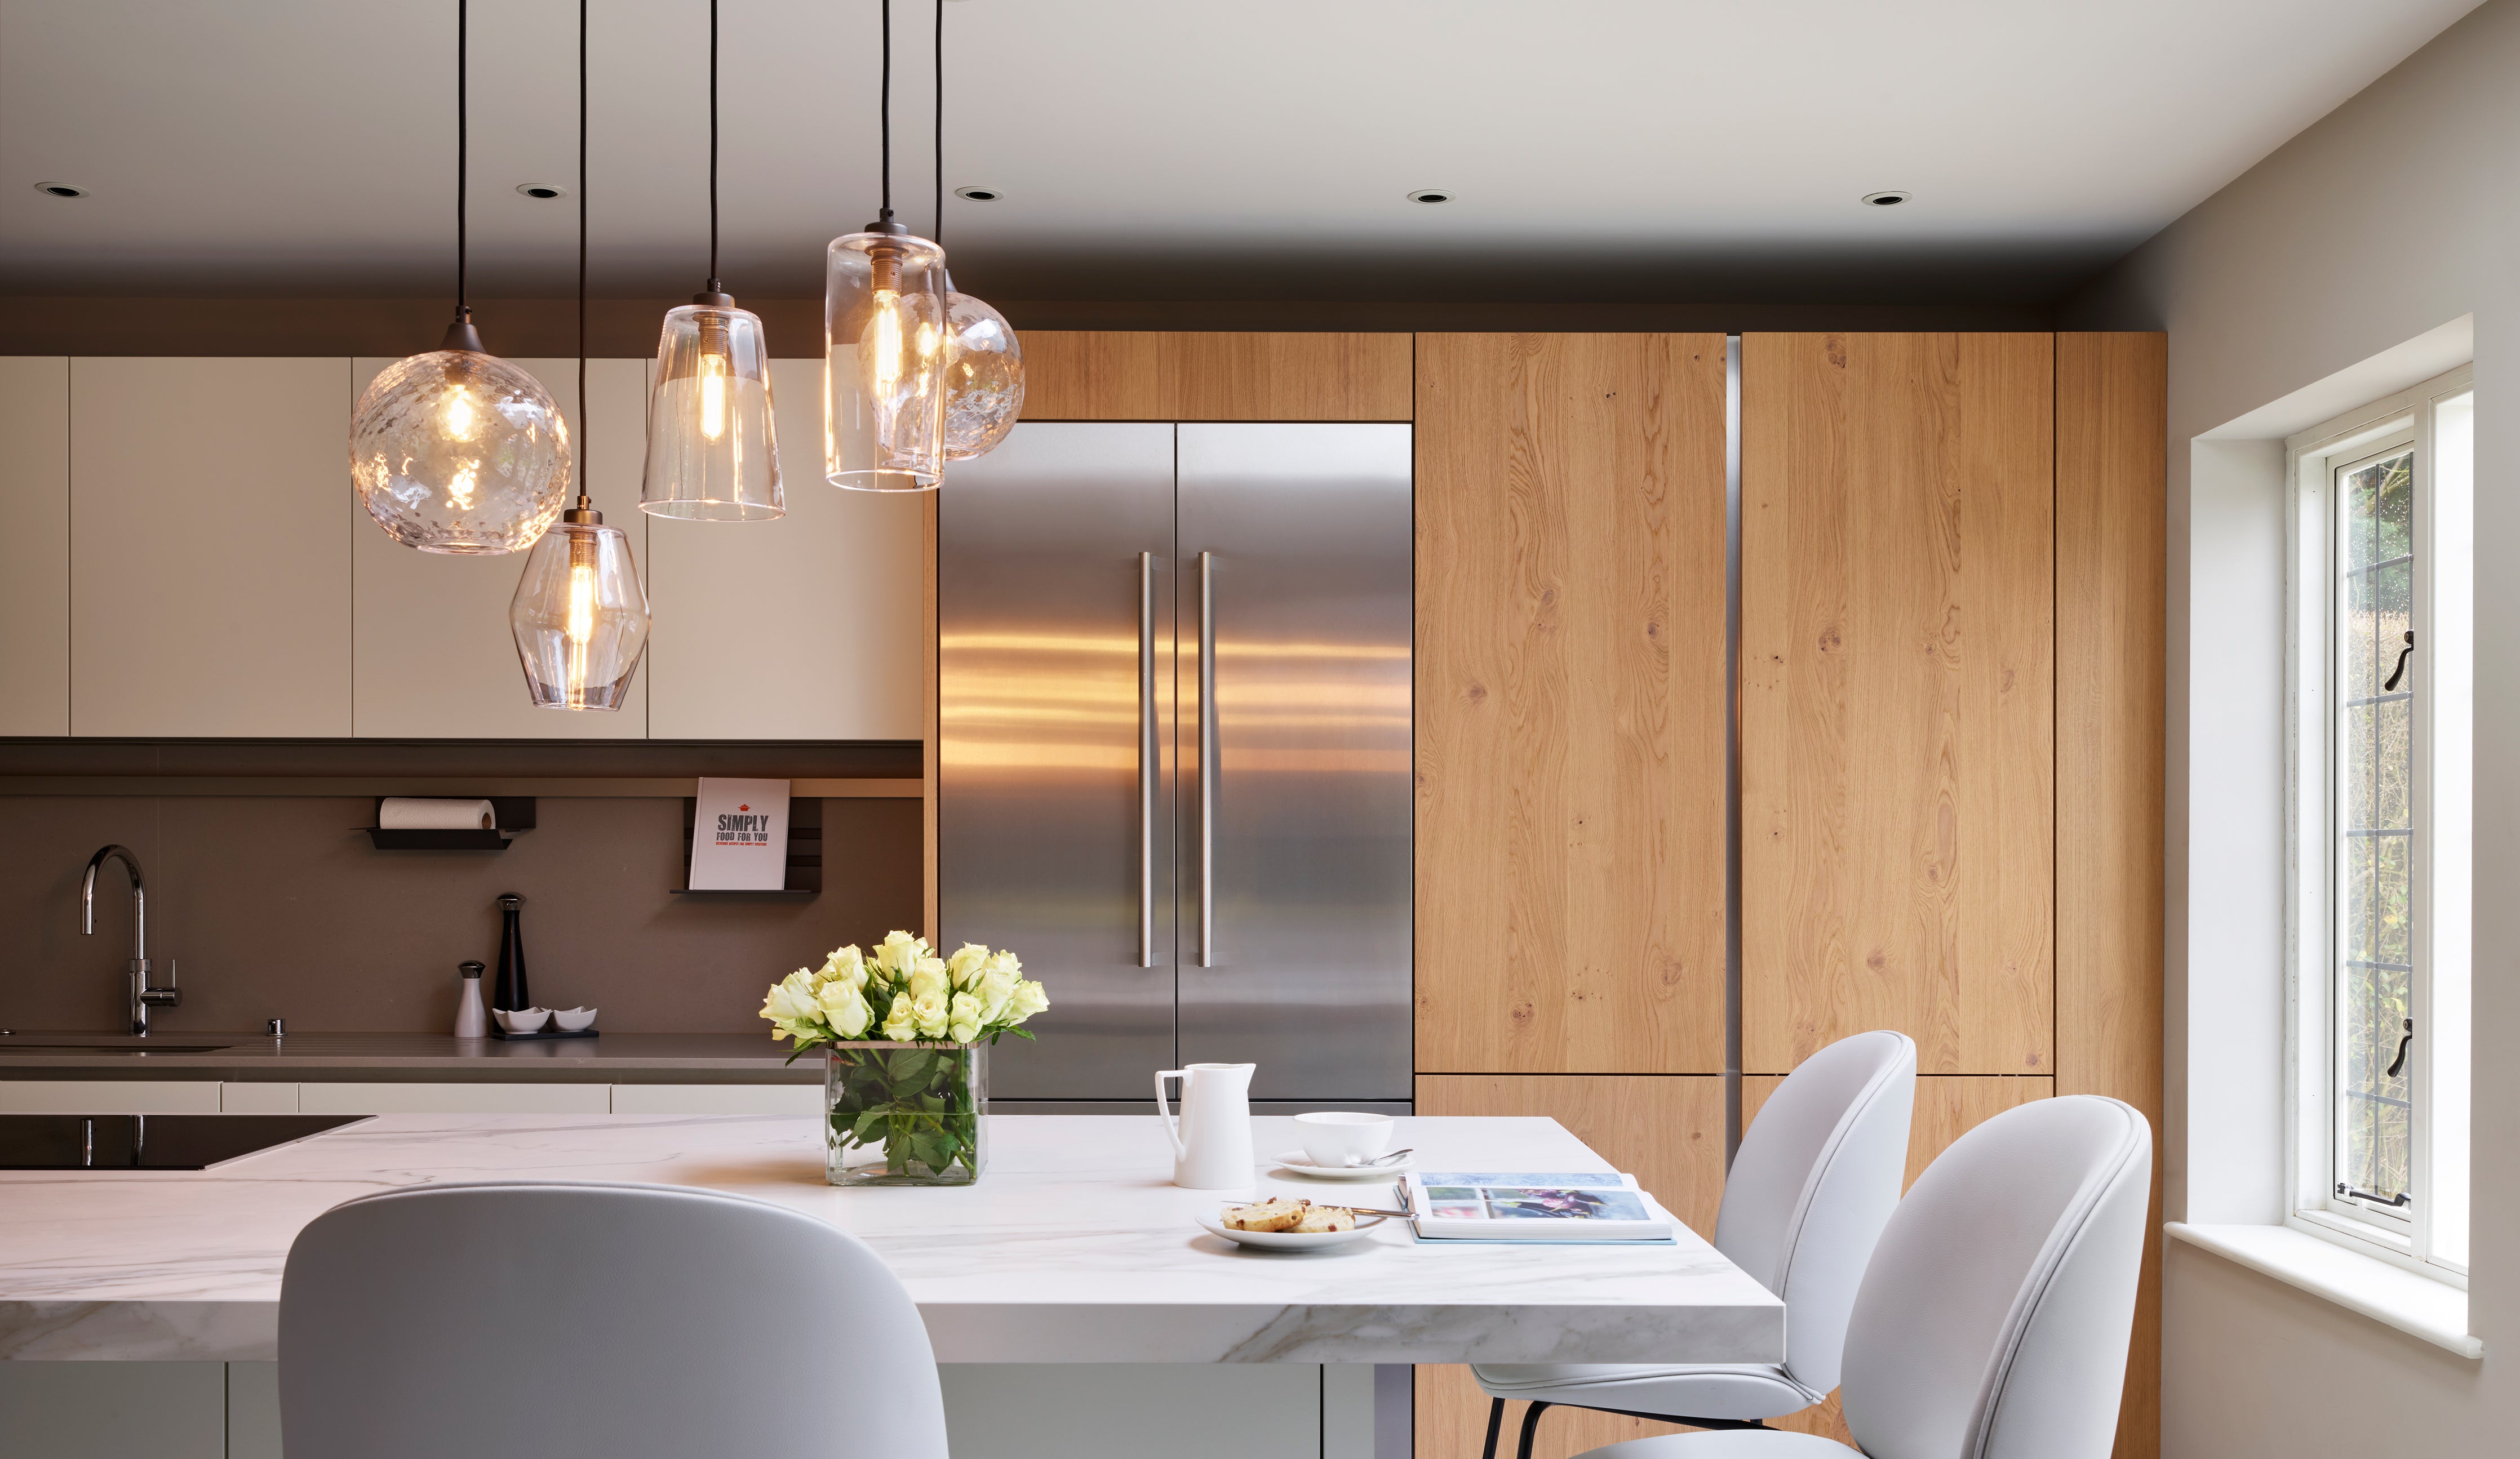 Pick-n-Mix Standard Pendants in clear diamond and plain glass finish over kitchen island by Neil lerner Design